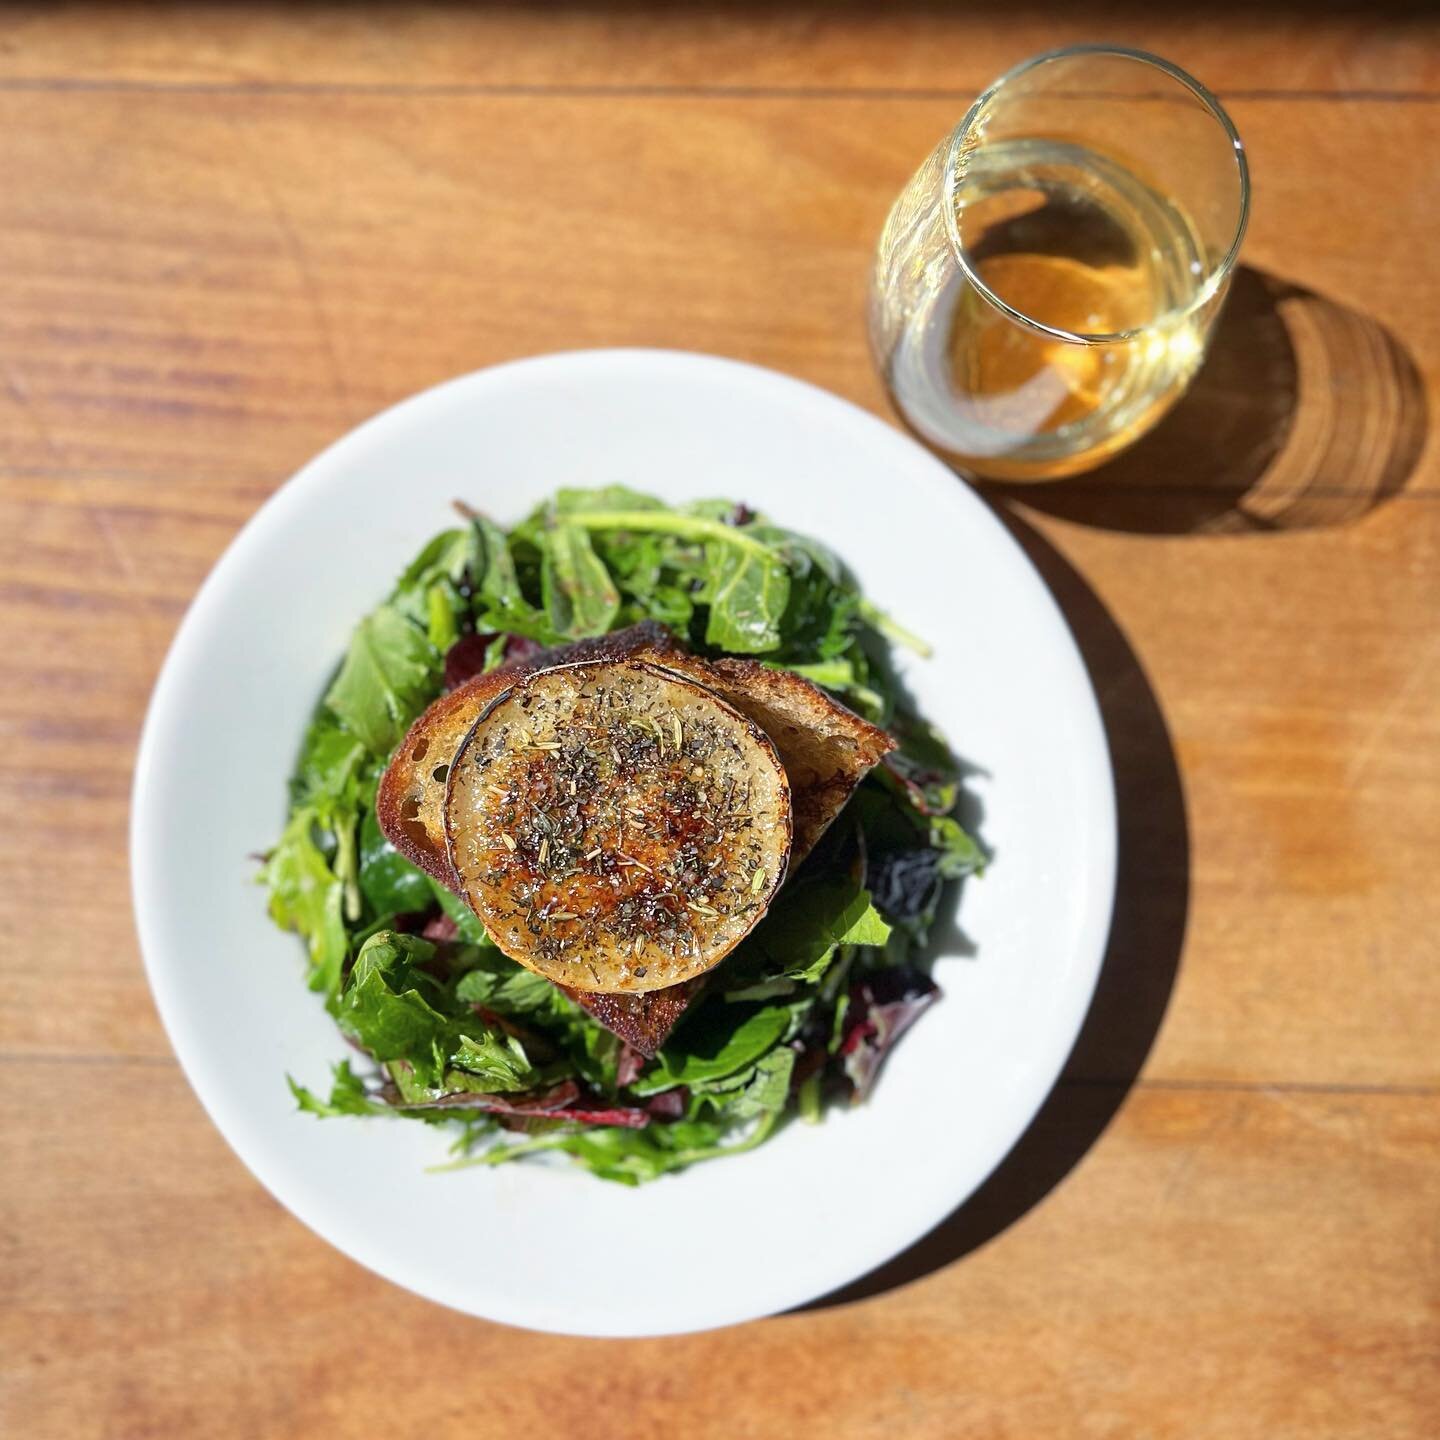 Warm Goat Cheese Salad 🥗 

Mesclun Greens, Herbs Vinaigrette, Country Toast.

Available at both Petit Trois L&rsquo;Original &amp; Le Valley!